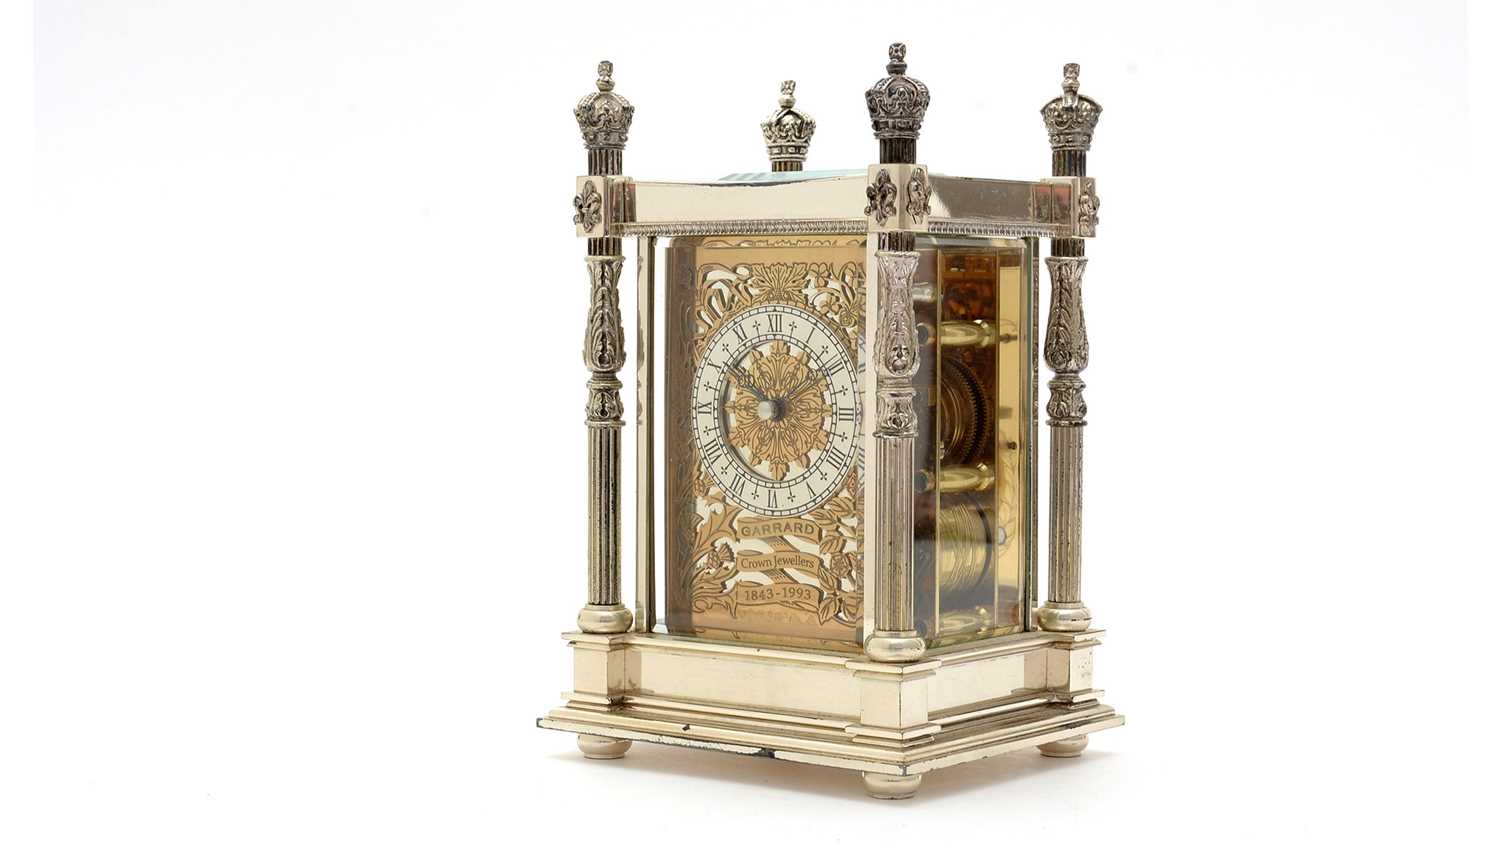 'The Canopy Clock': a large silver carriage clock, by Garrard,